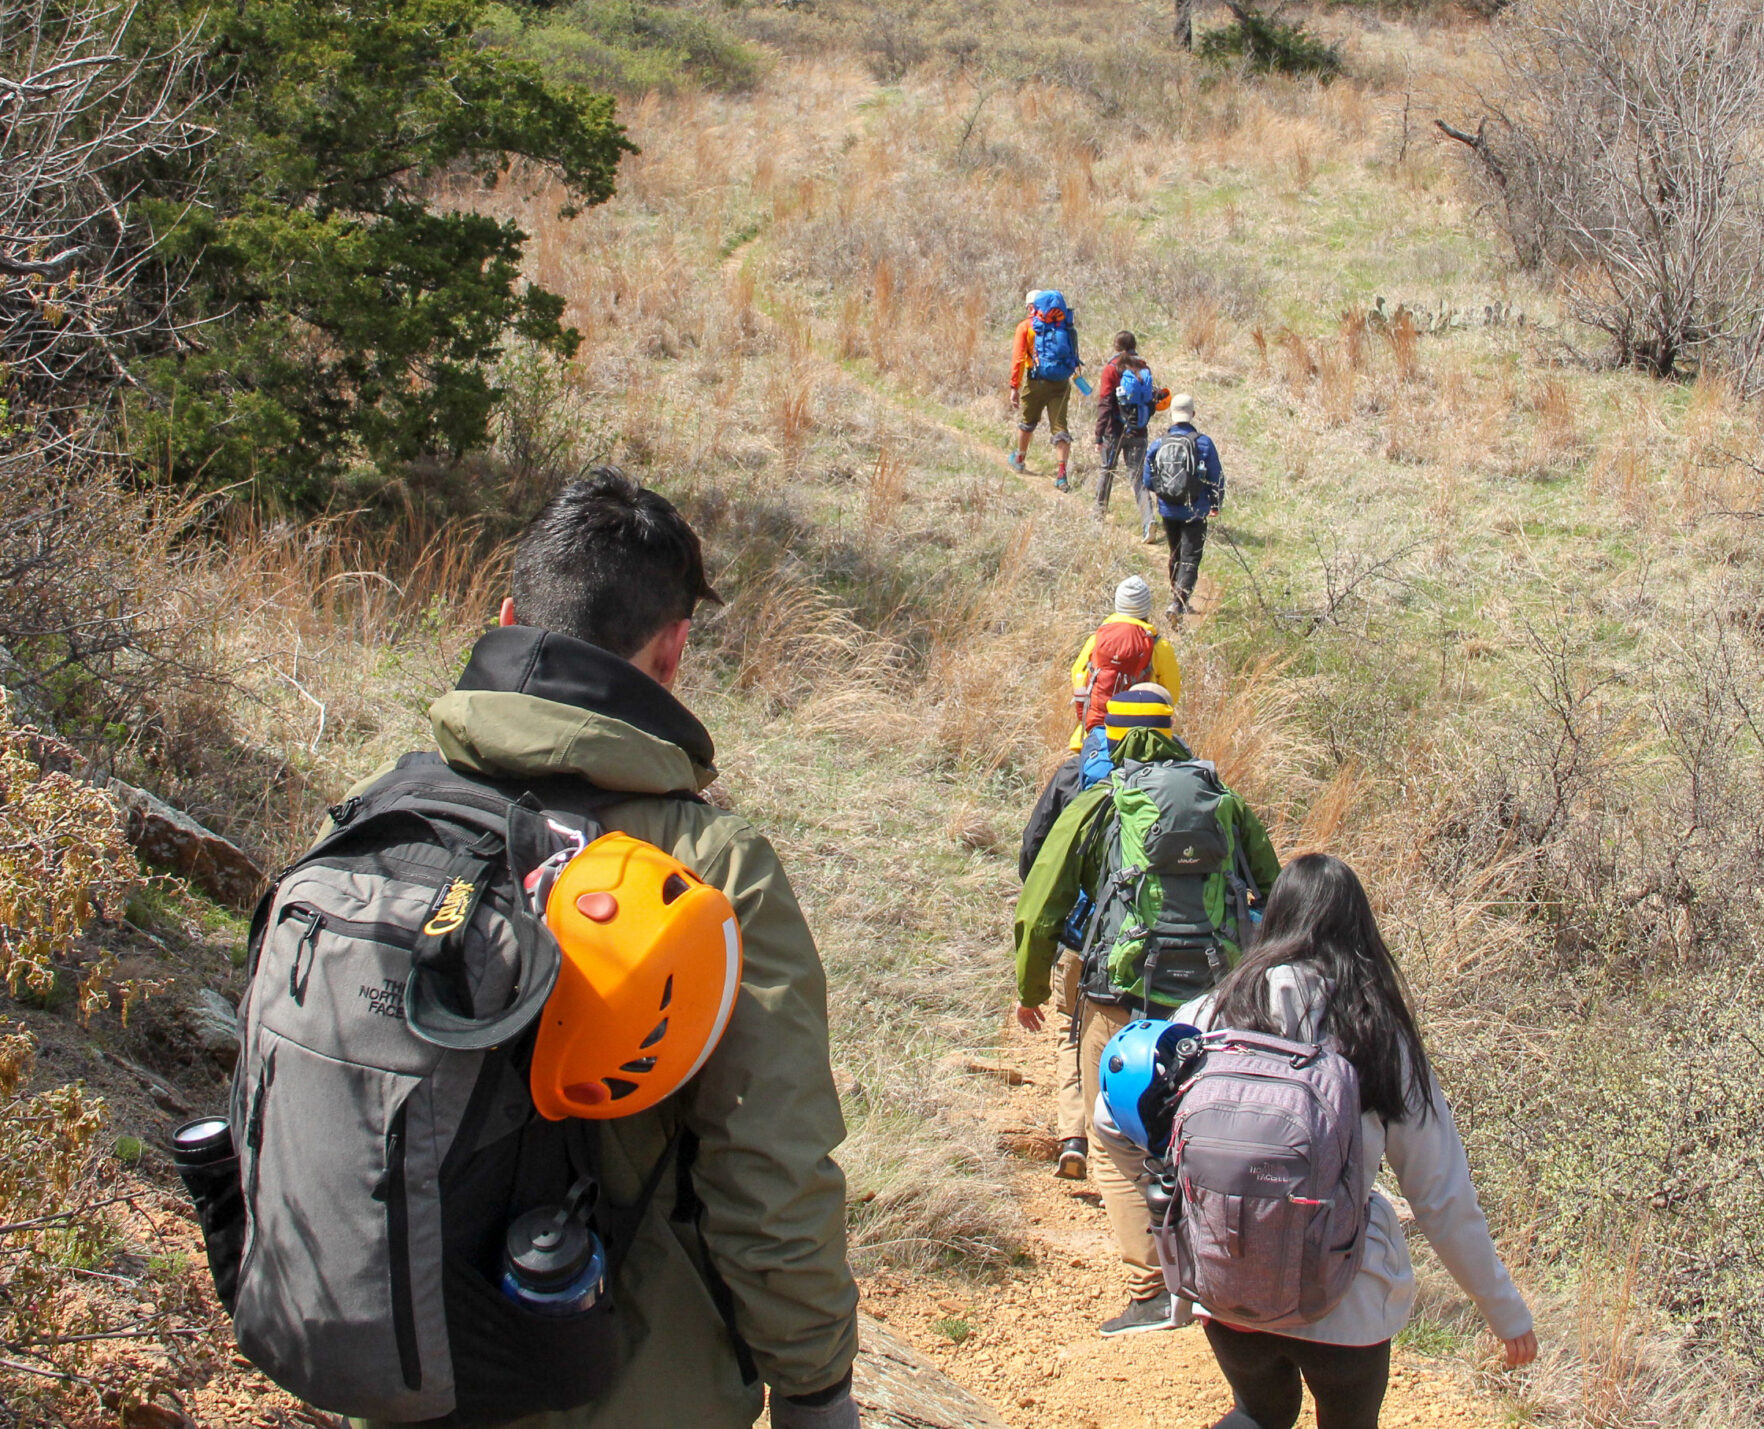 People hiking in coats